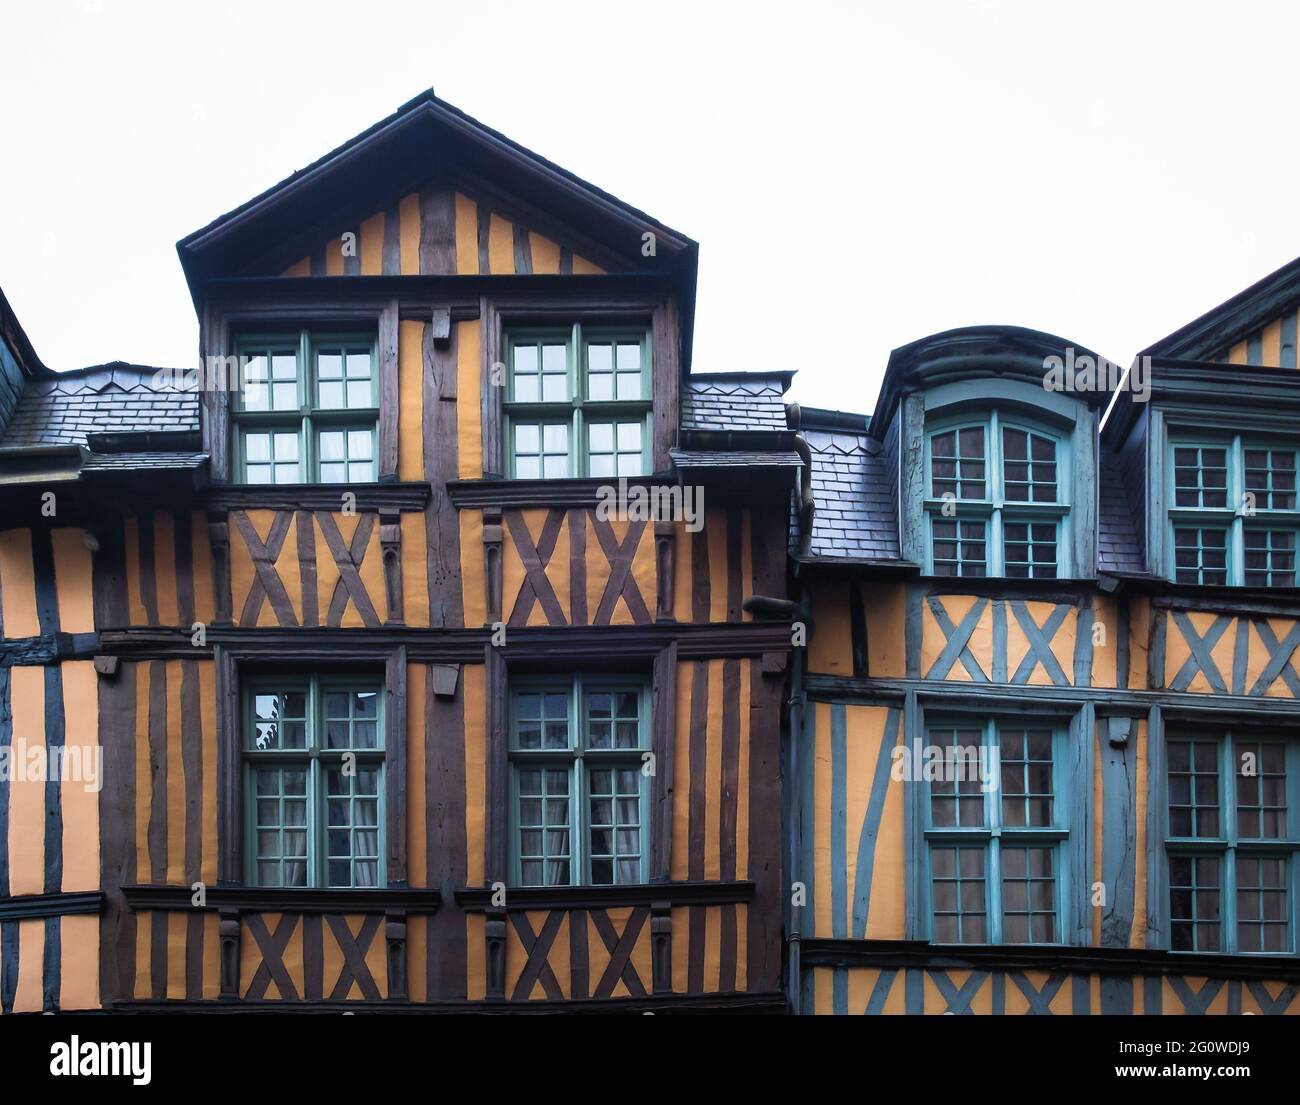 Rouen, France, Oct 2020, close up of the upper part of some medieval half-timbered houses Stock Photo